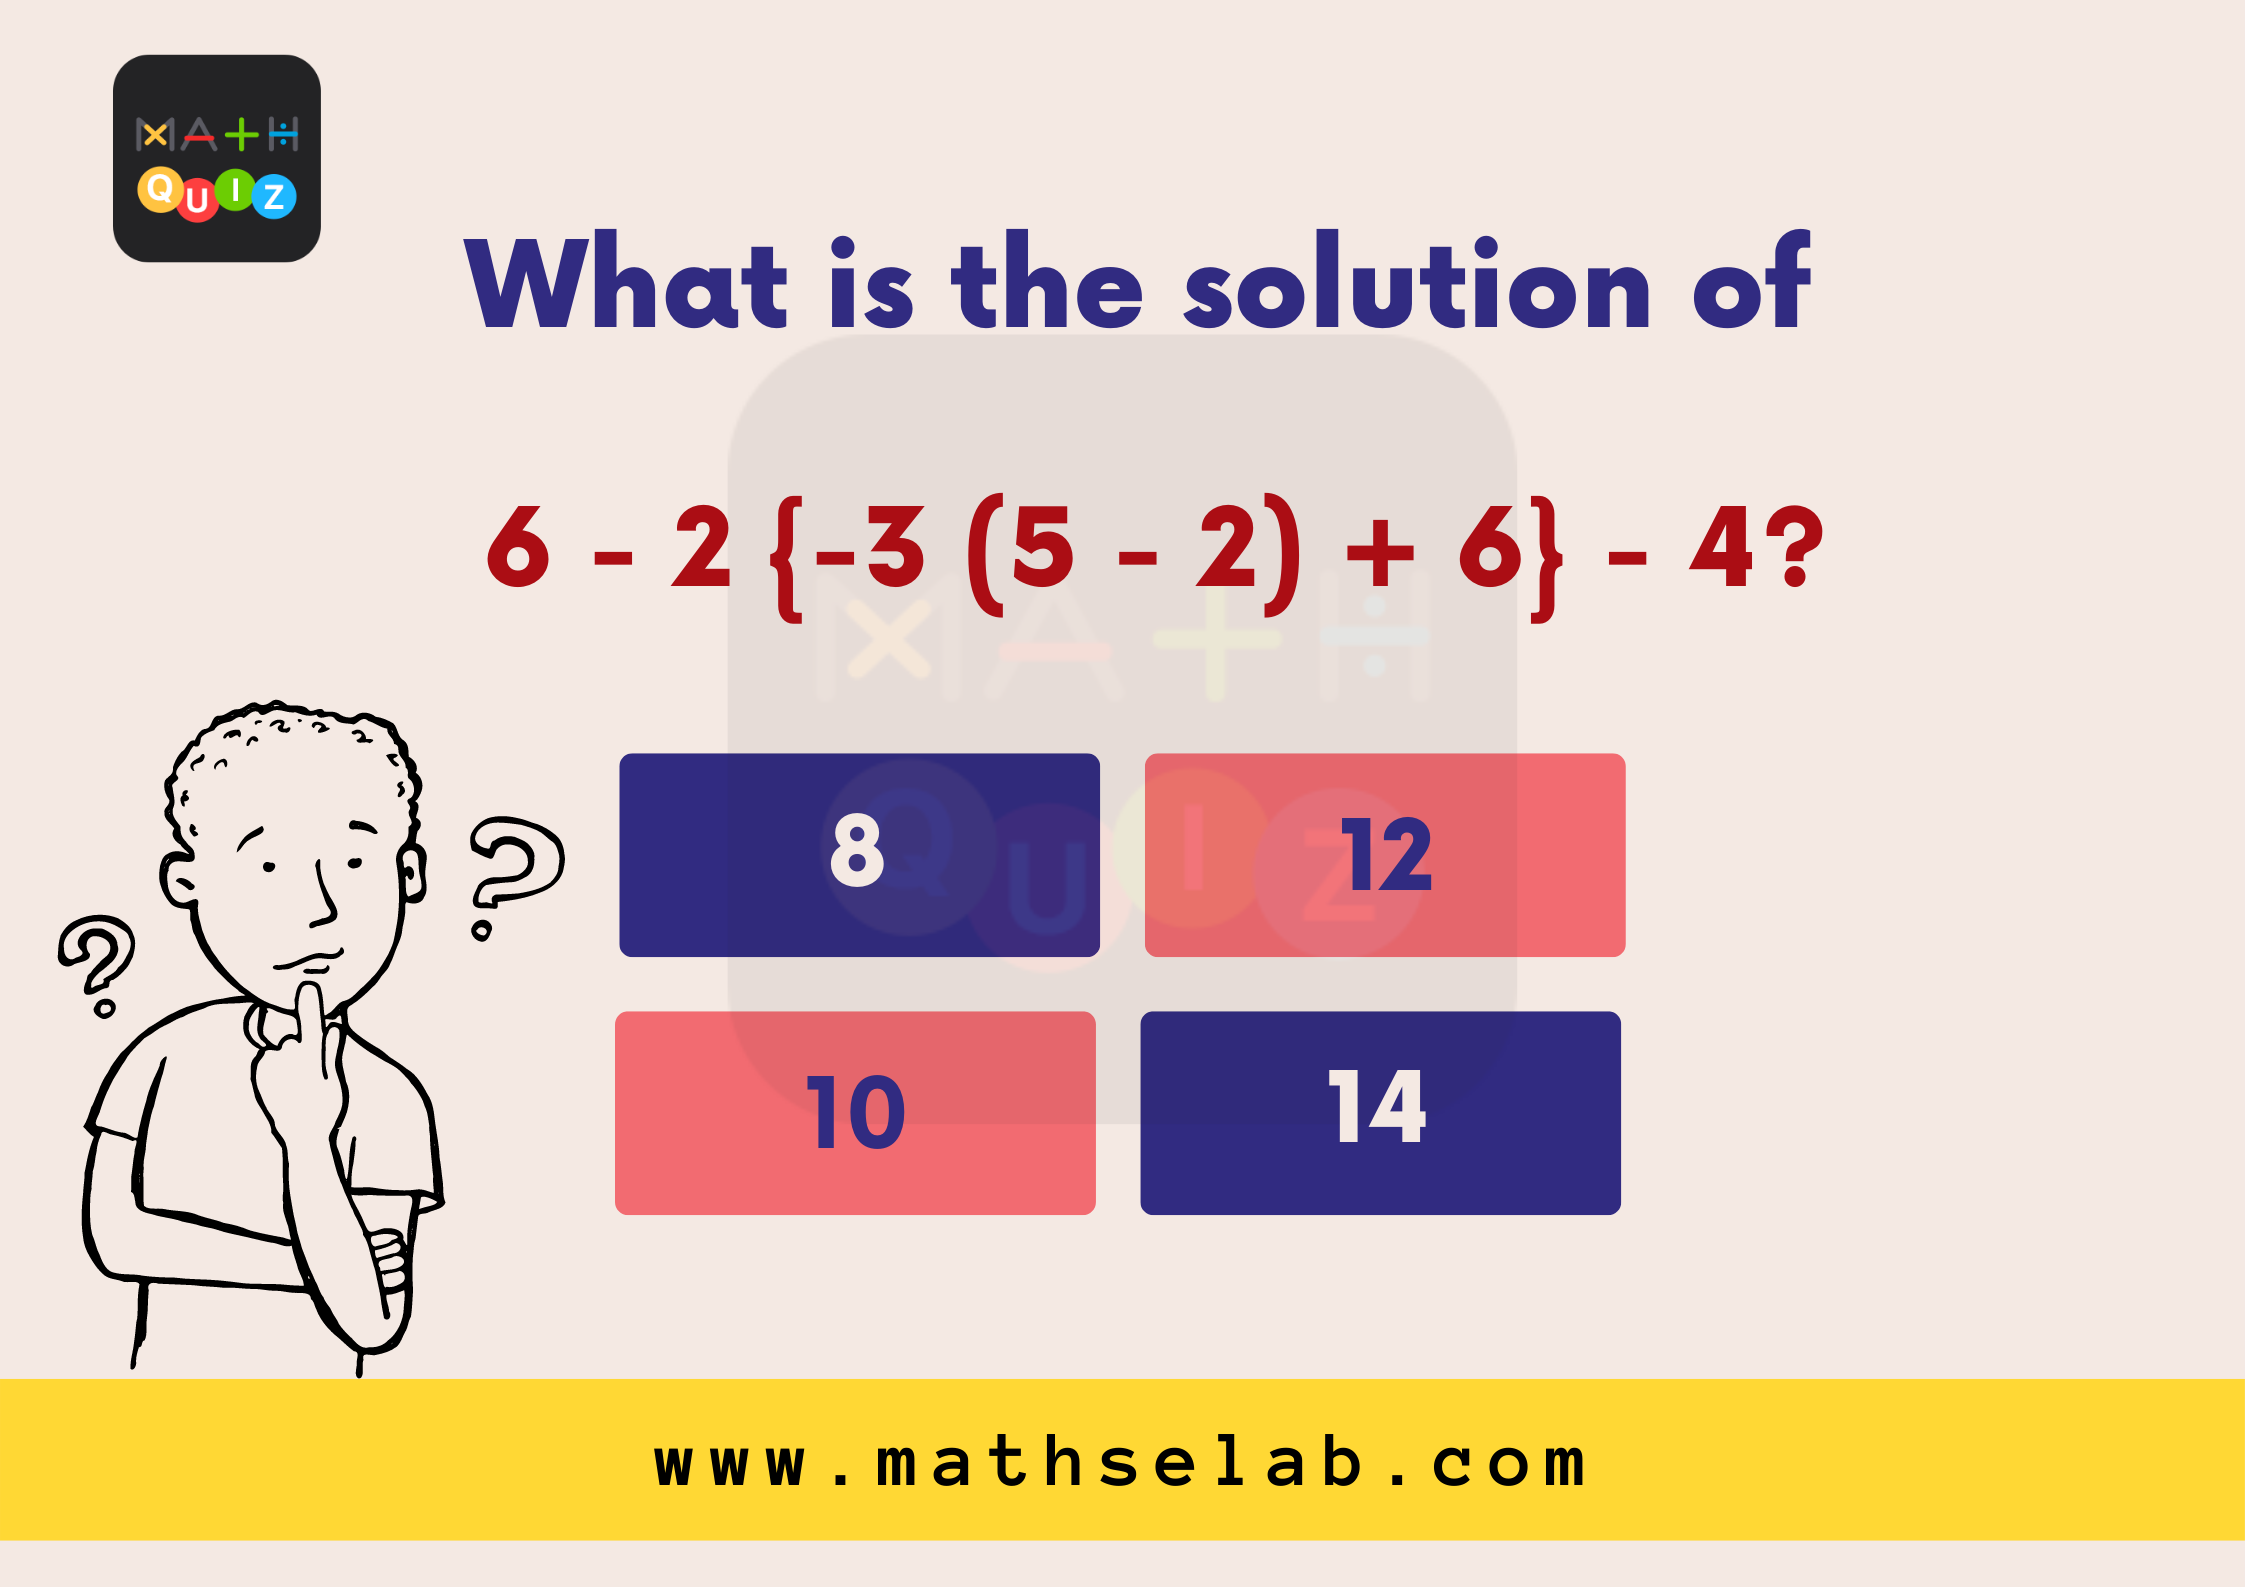 What is the solution of 6 - 2 {-3 (5 - 2) + 6} - 4 - mathselab.com